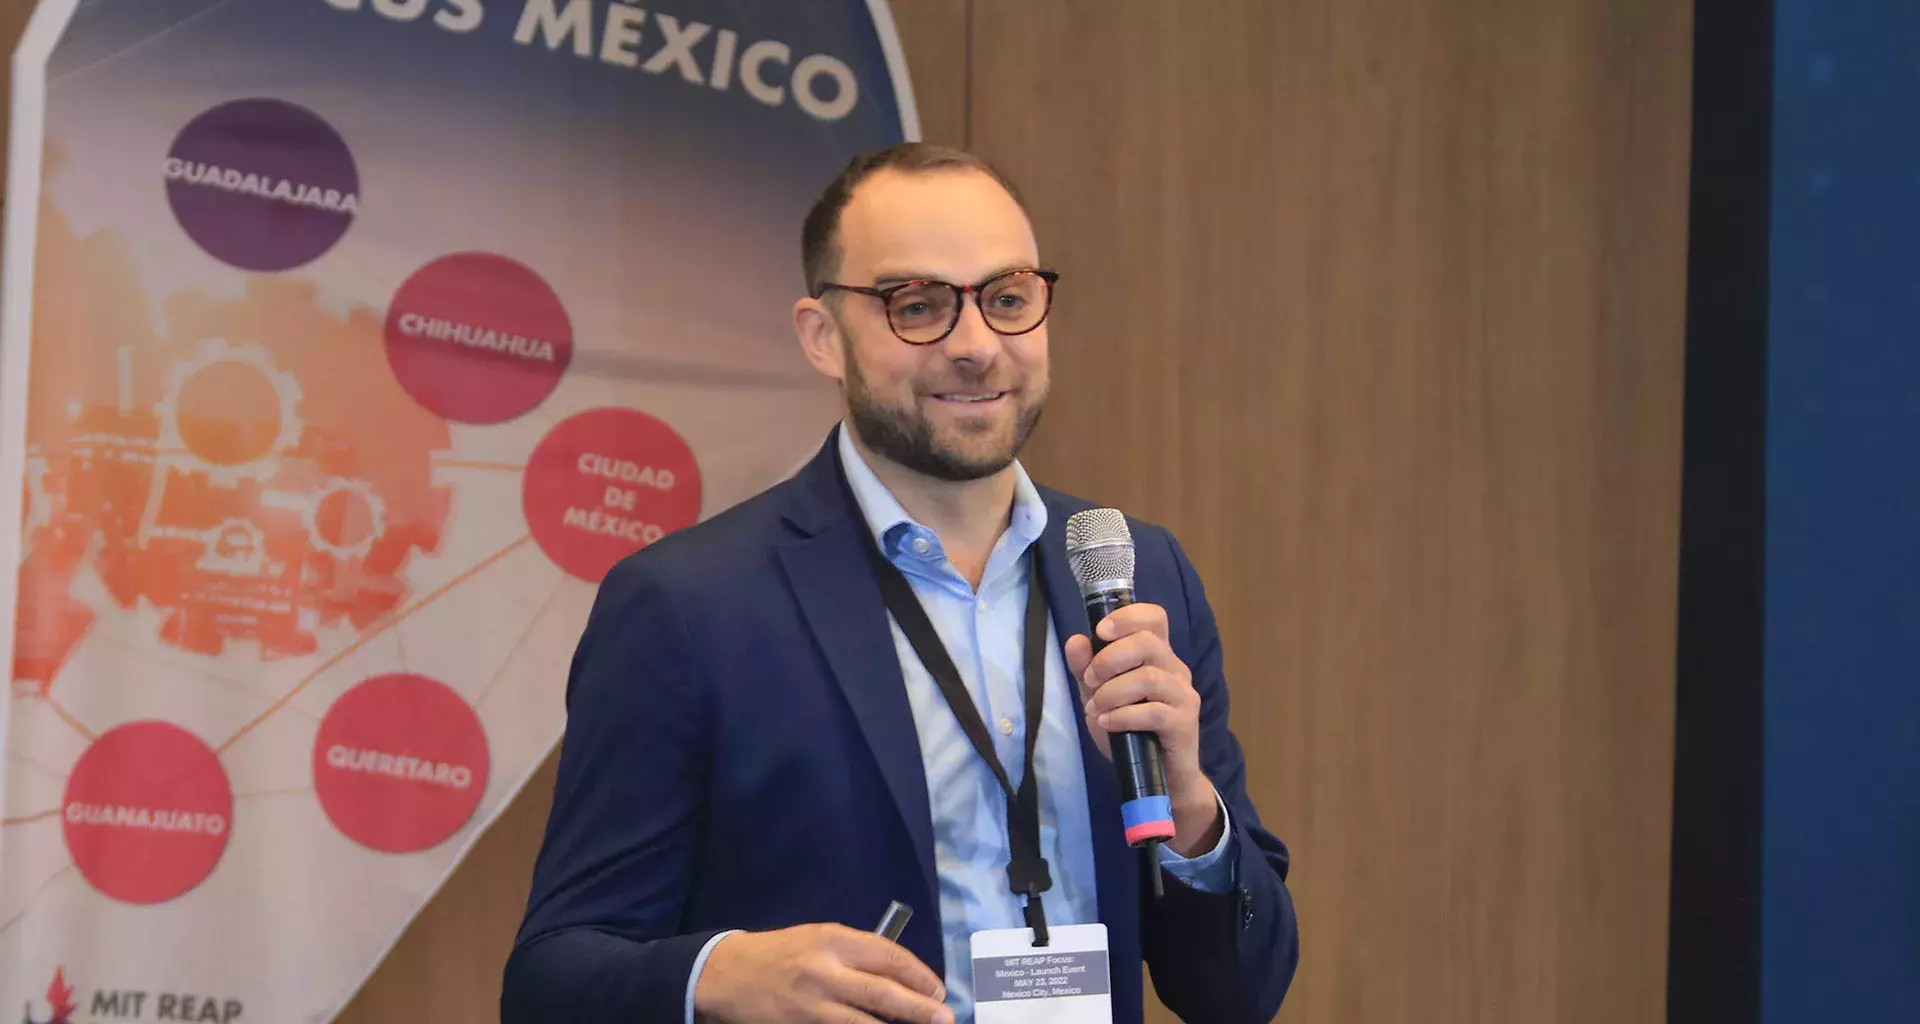 MIT and Tec de Monterrey team up to boost innovation in Mexico